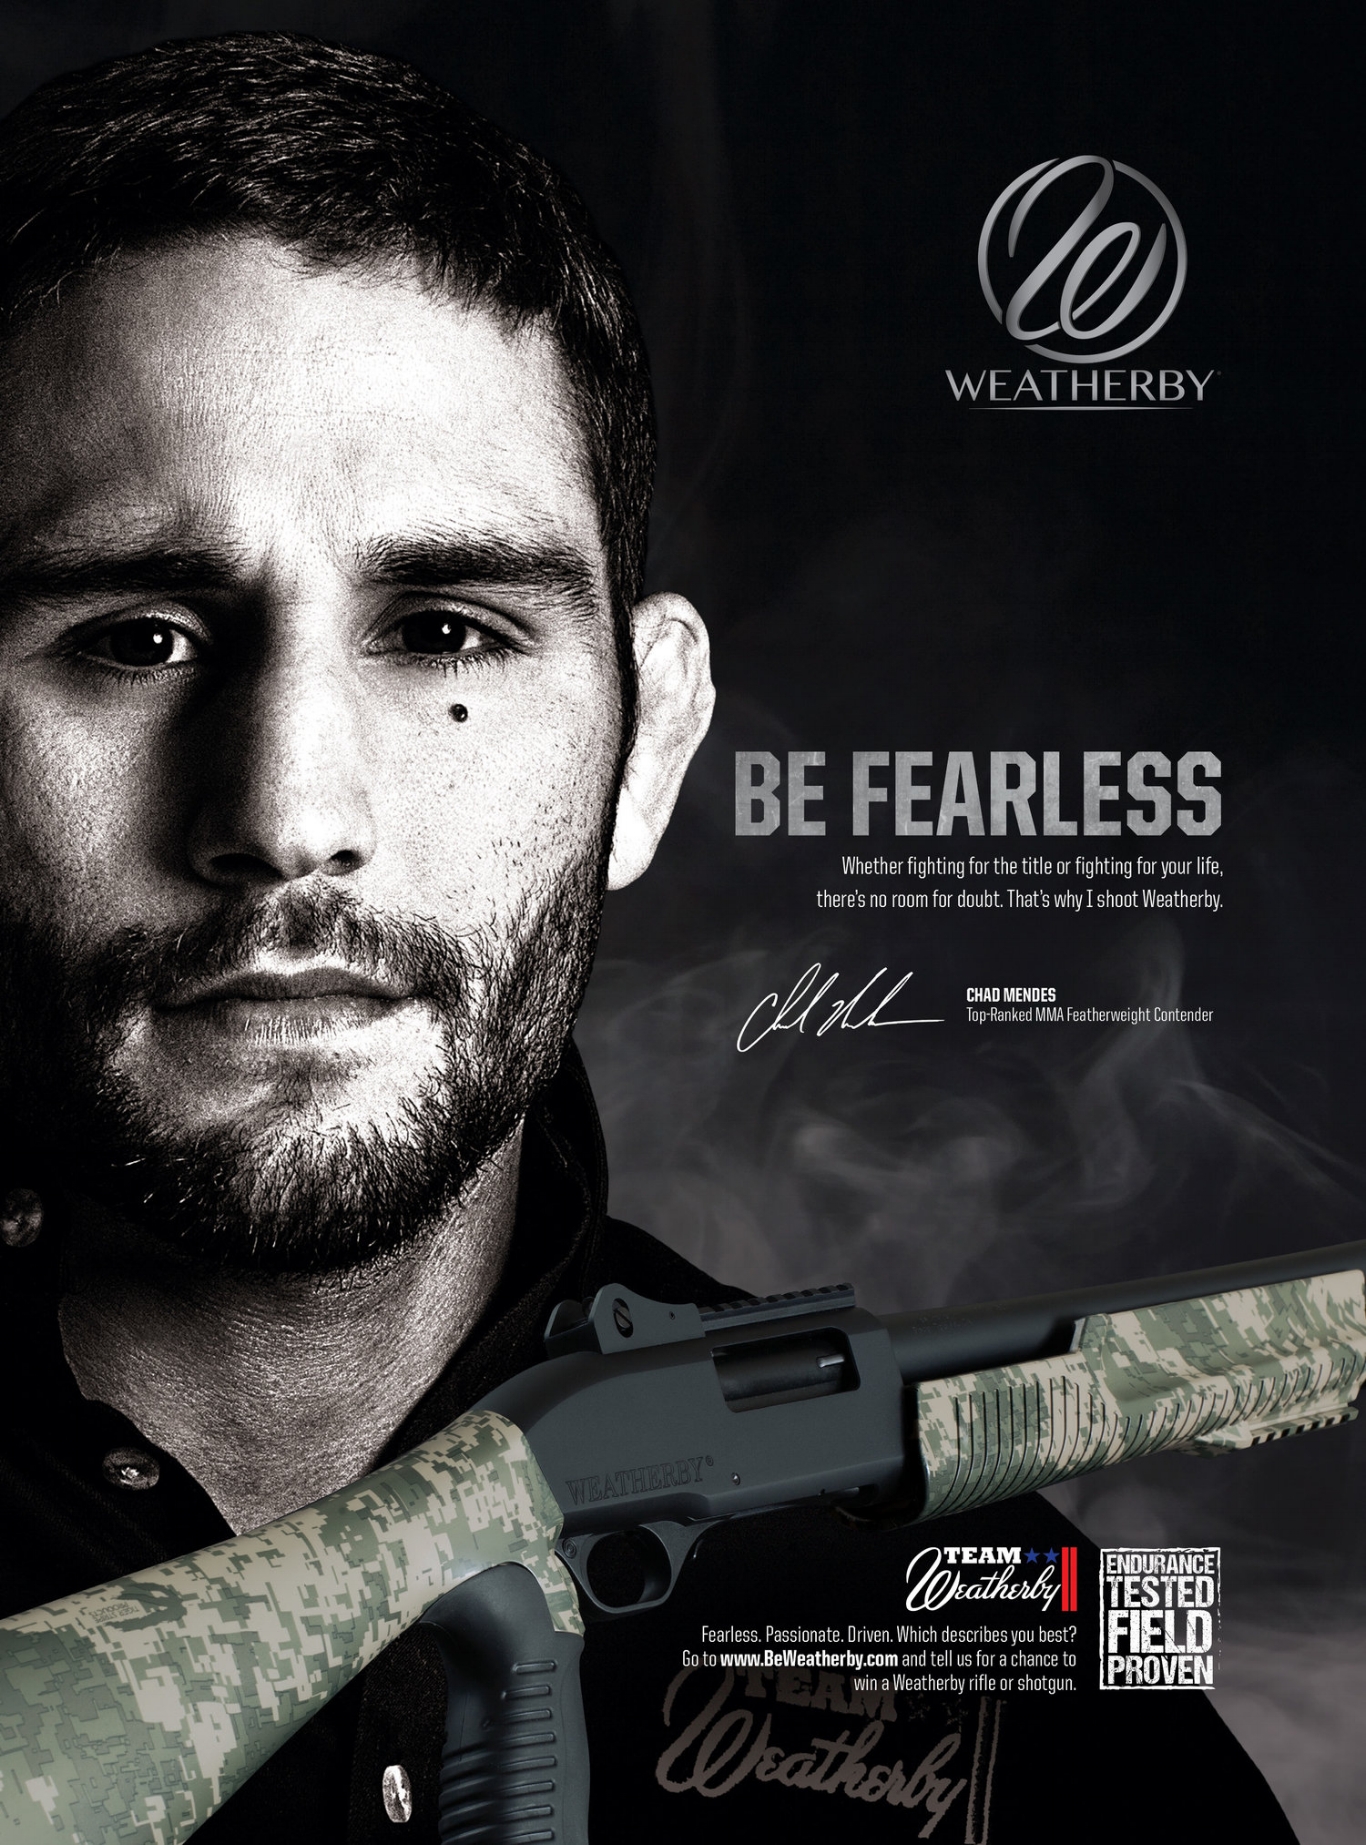 2016 Weatherby Ad Campaign